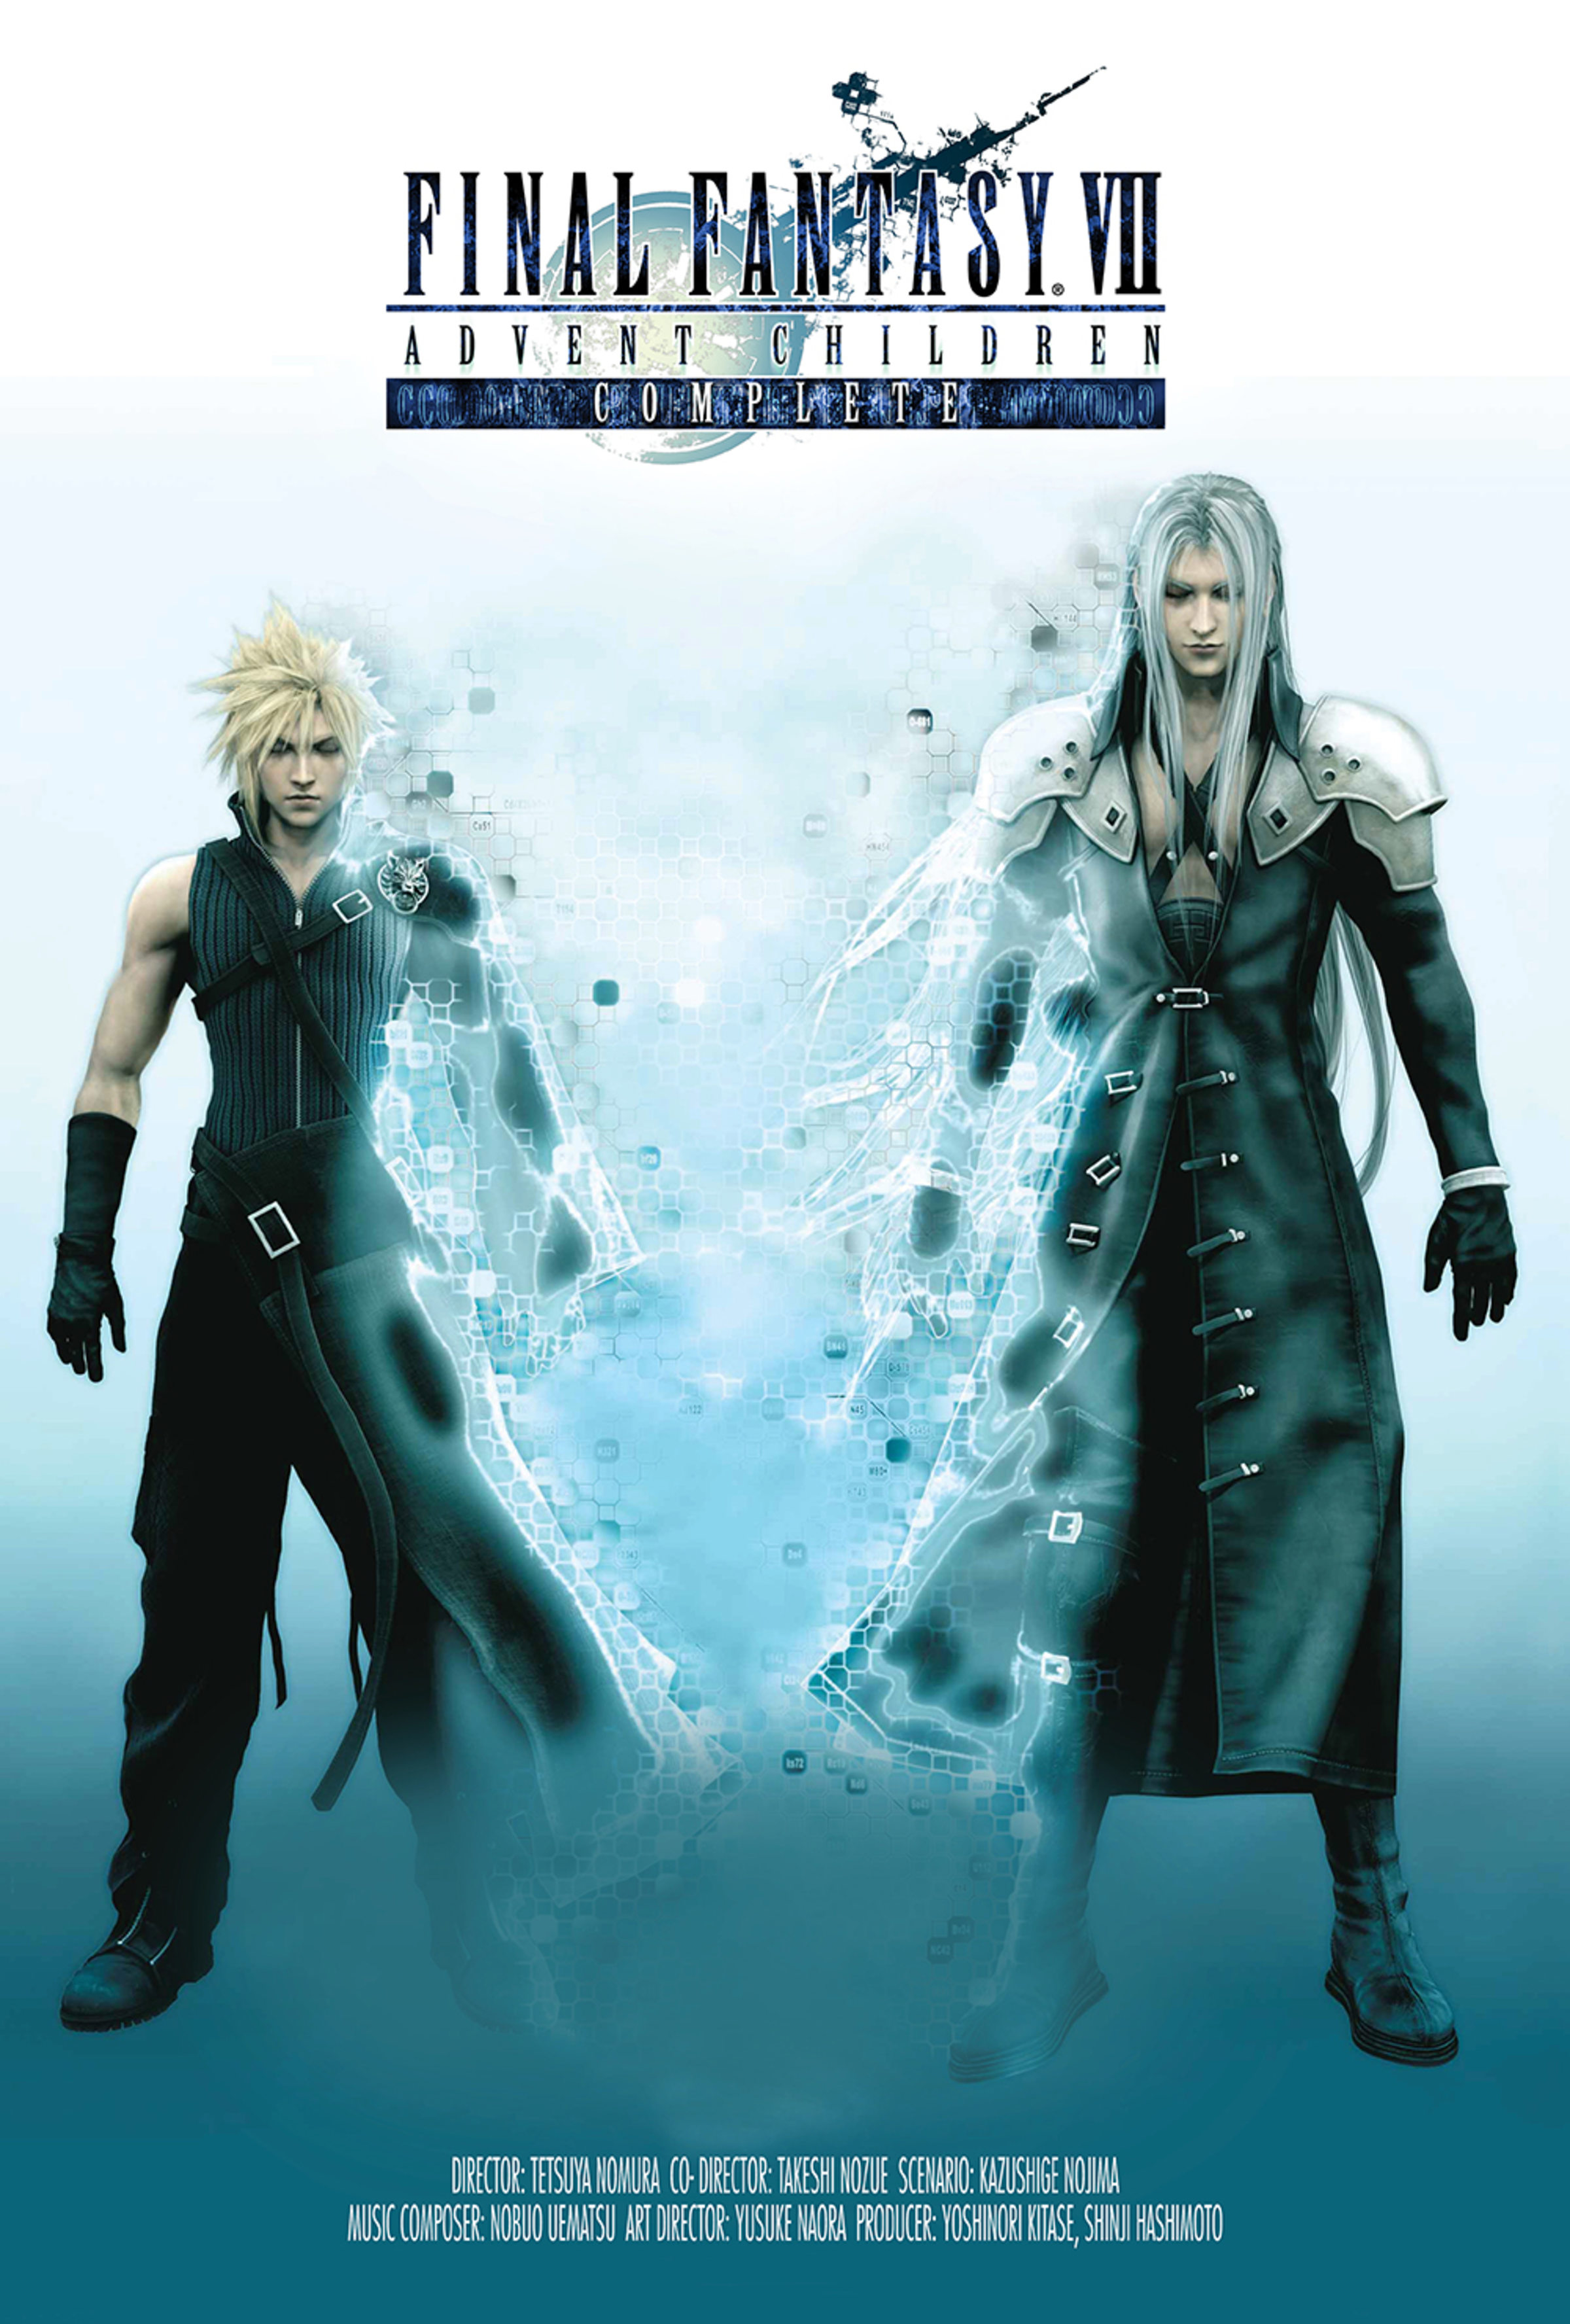 Final Fantasy XVI: our review of Square Enix's new game in the